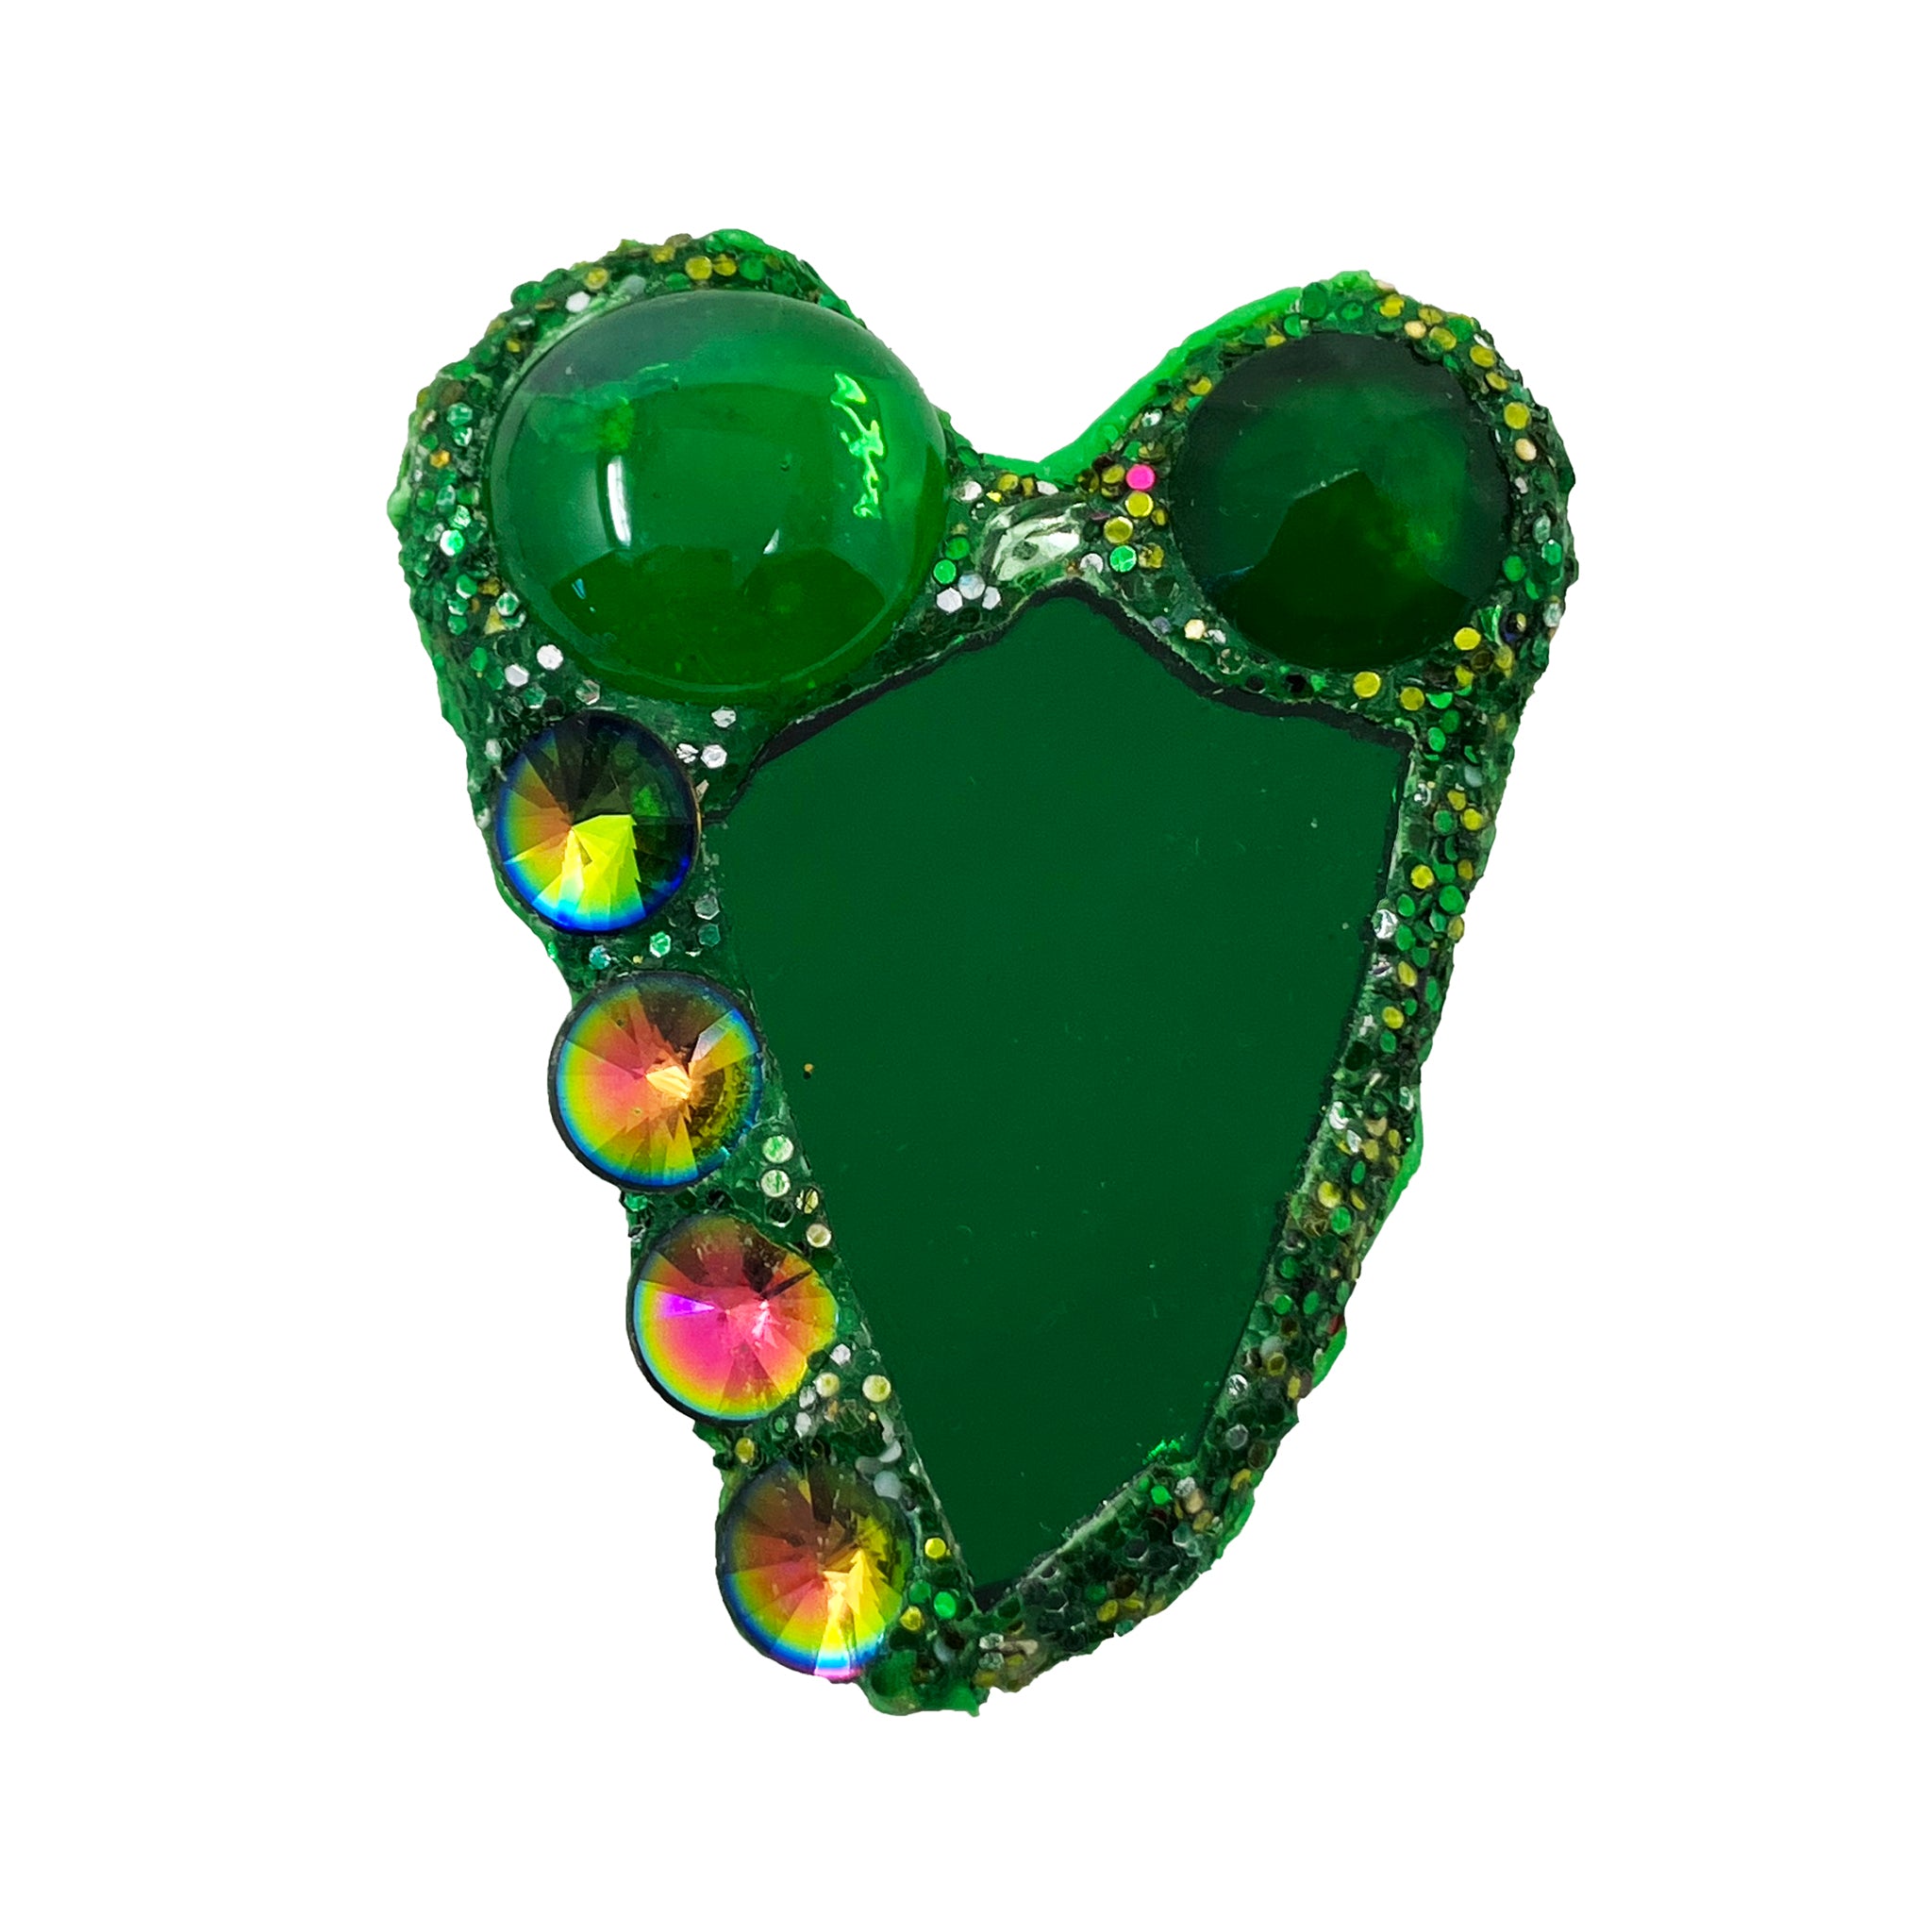 GREEN HEART BROOCH WITH CRYSTALS, 2022